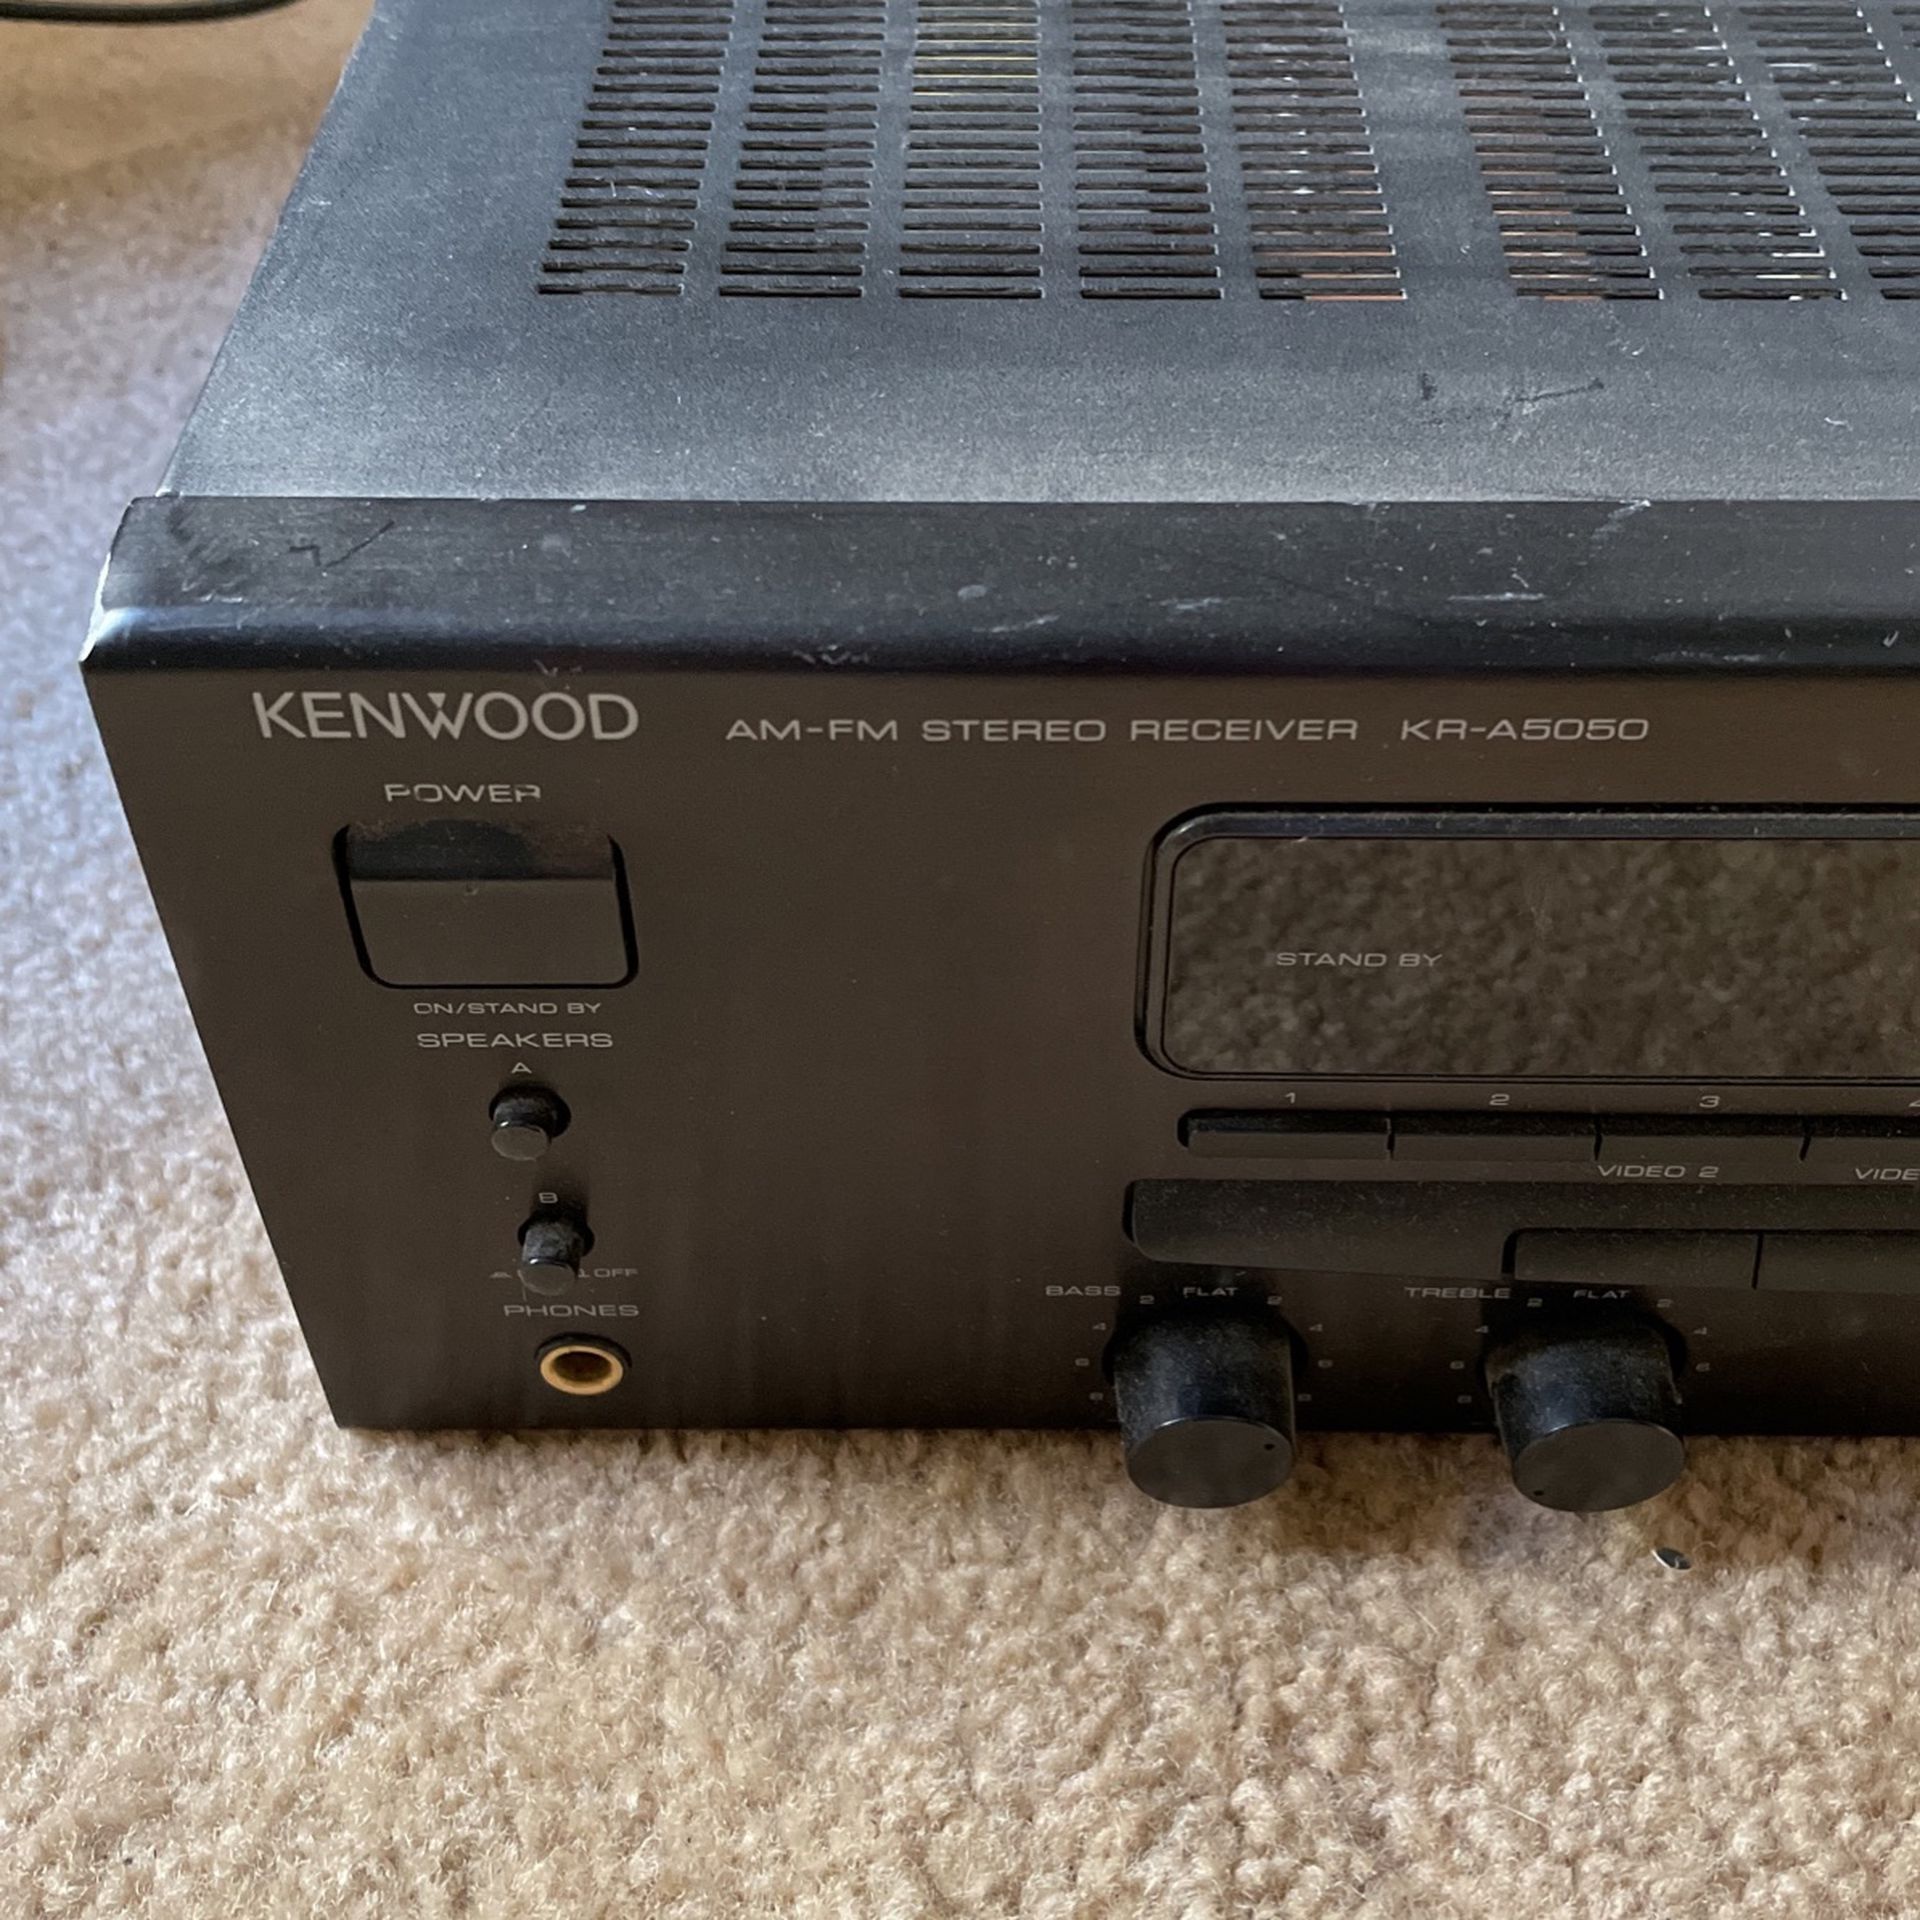 Kenwood Stereo Receiver KR-A5050